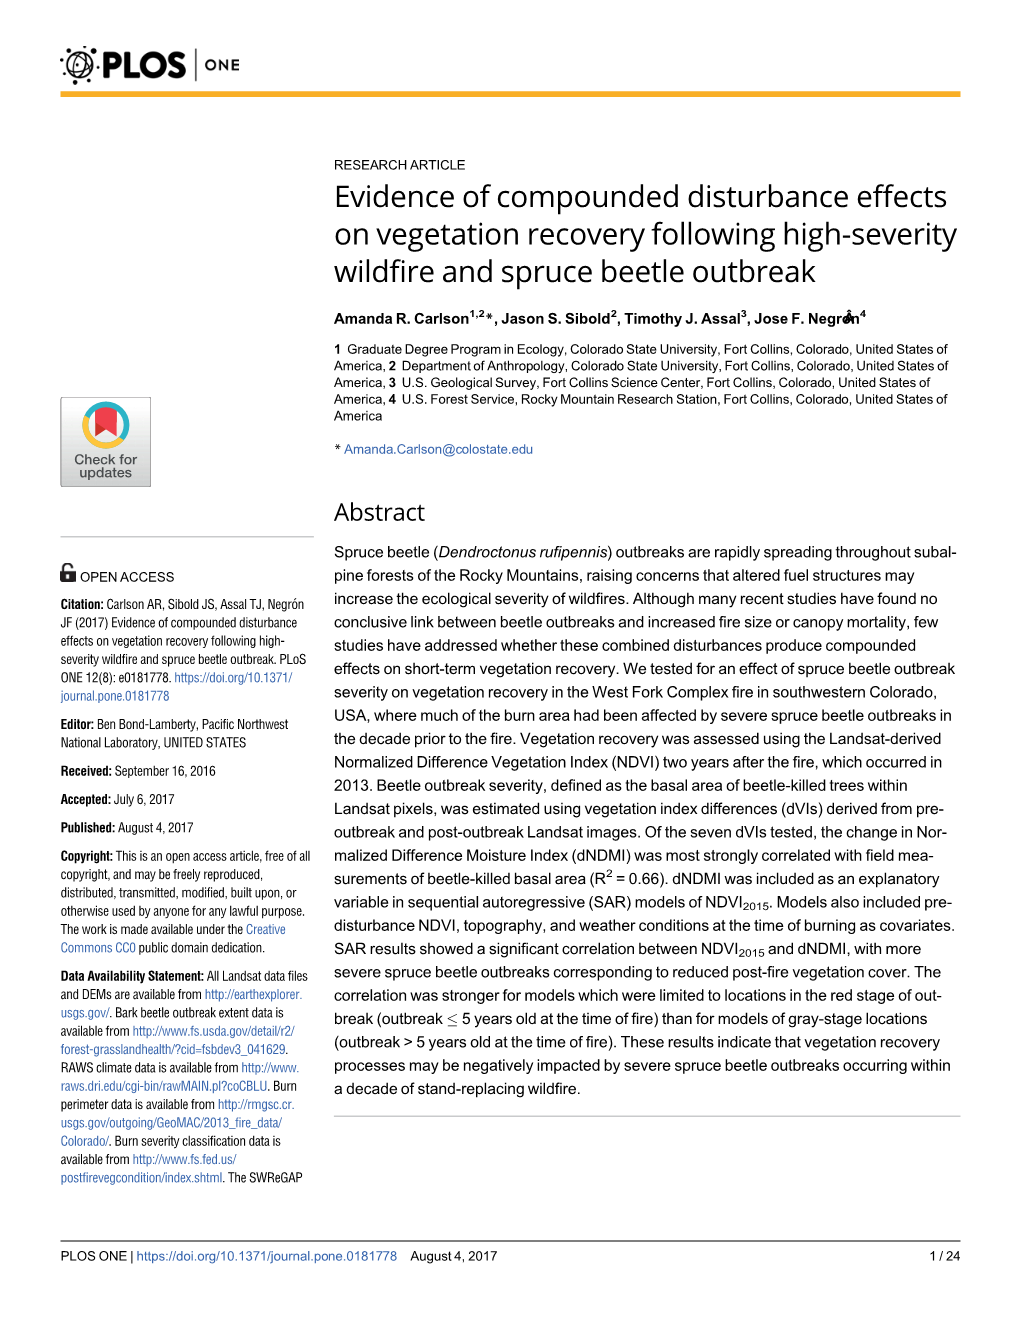 Evidence of Compounded Disturbance Effects on Vegetation Recovery Following High-Severity Wildfire and Spruce Beetle Outbreak